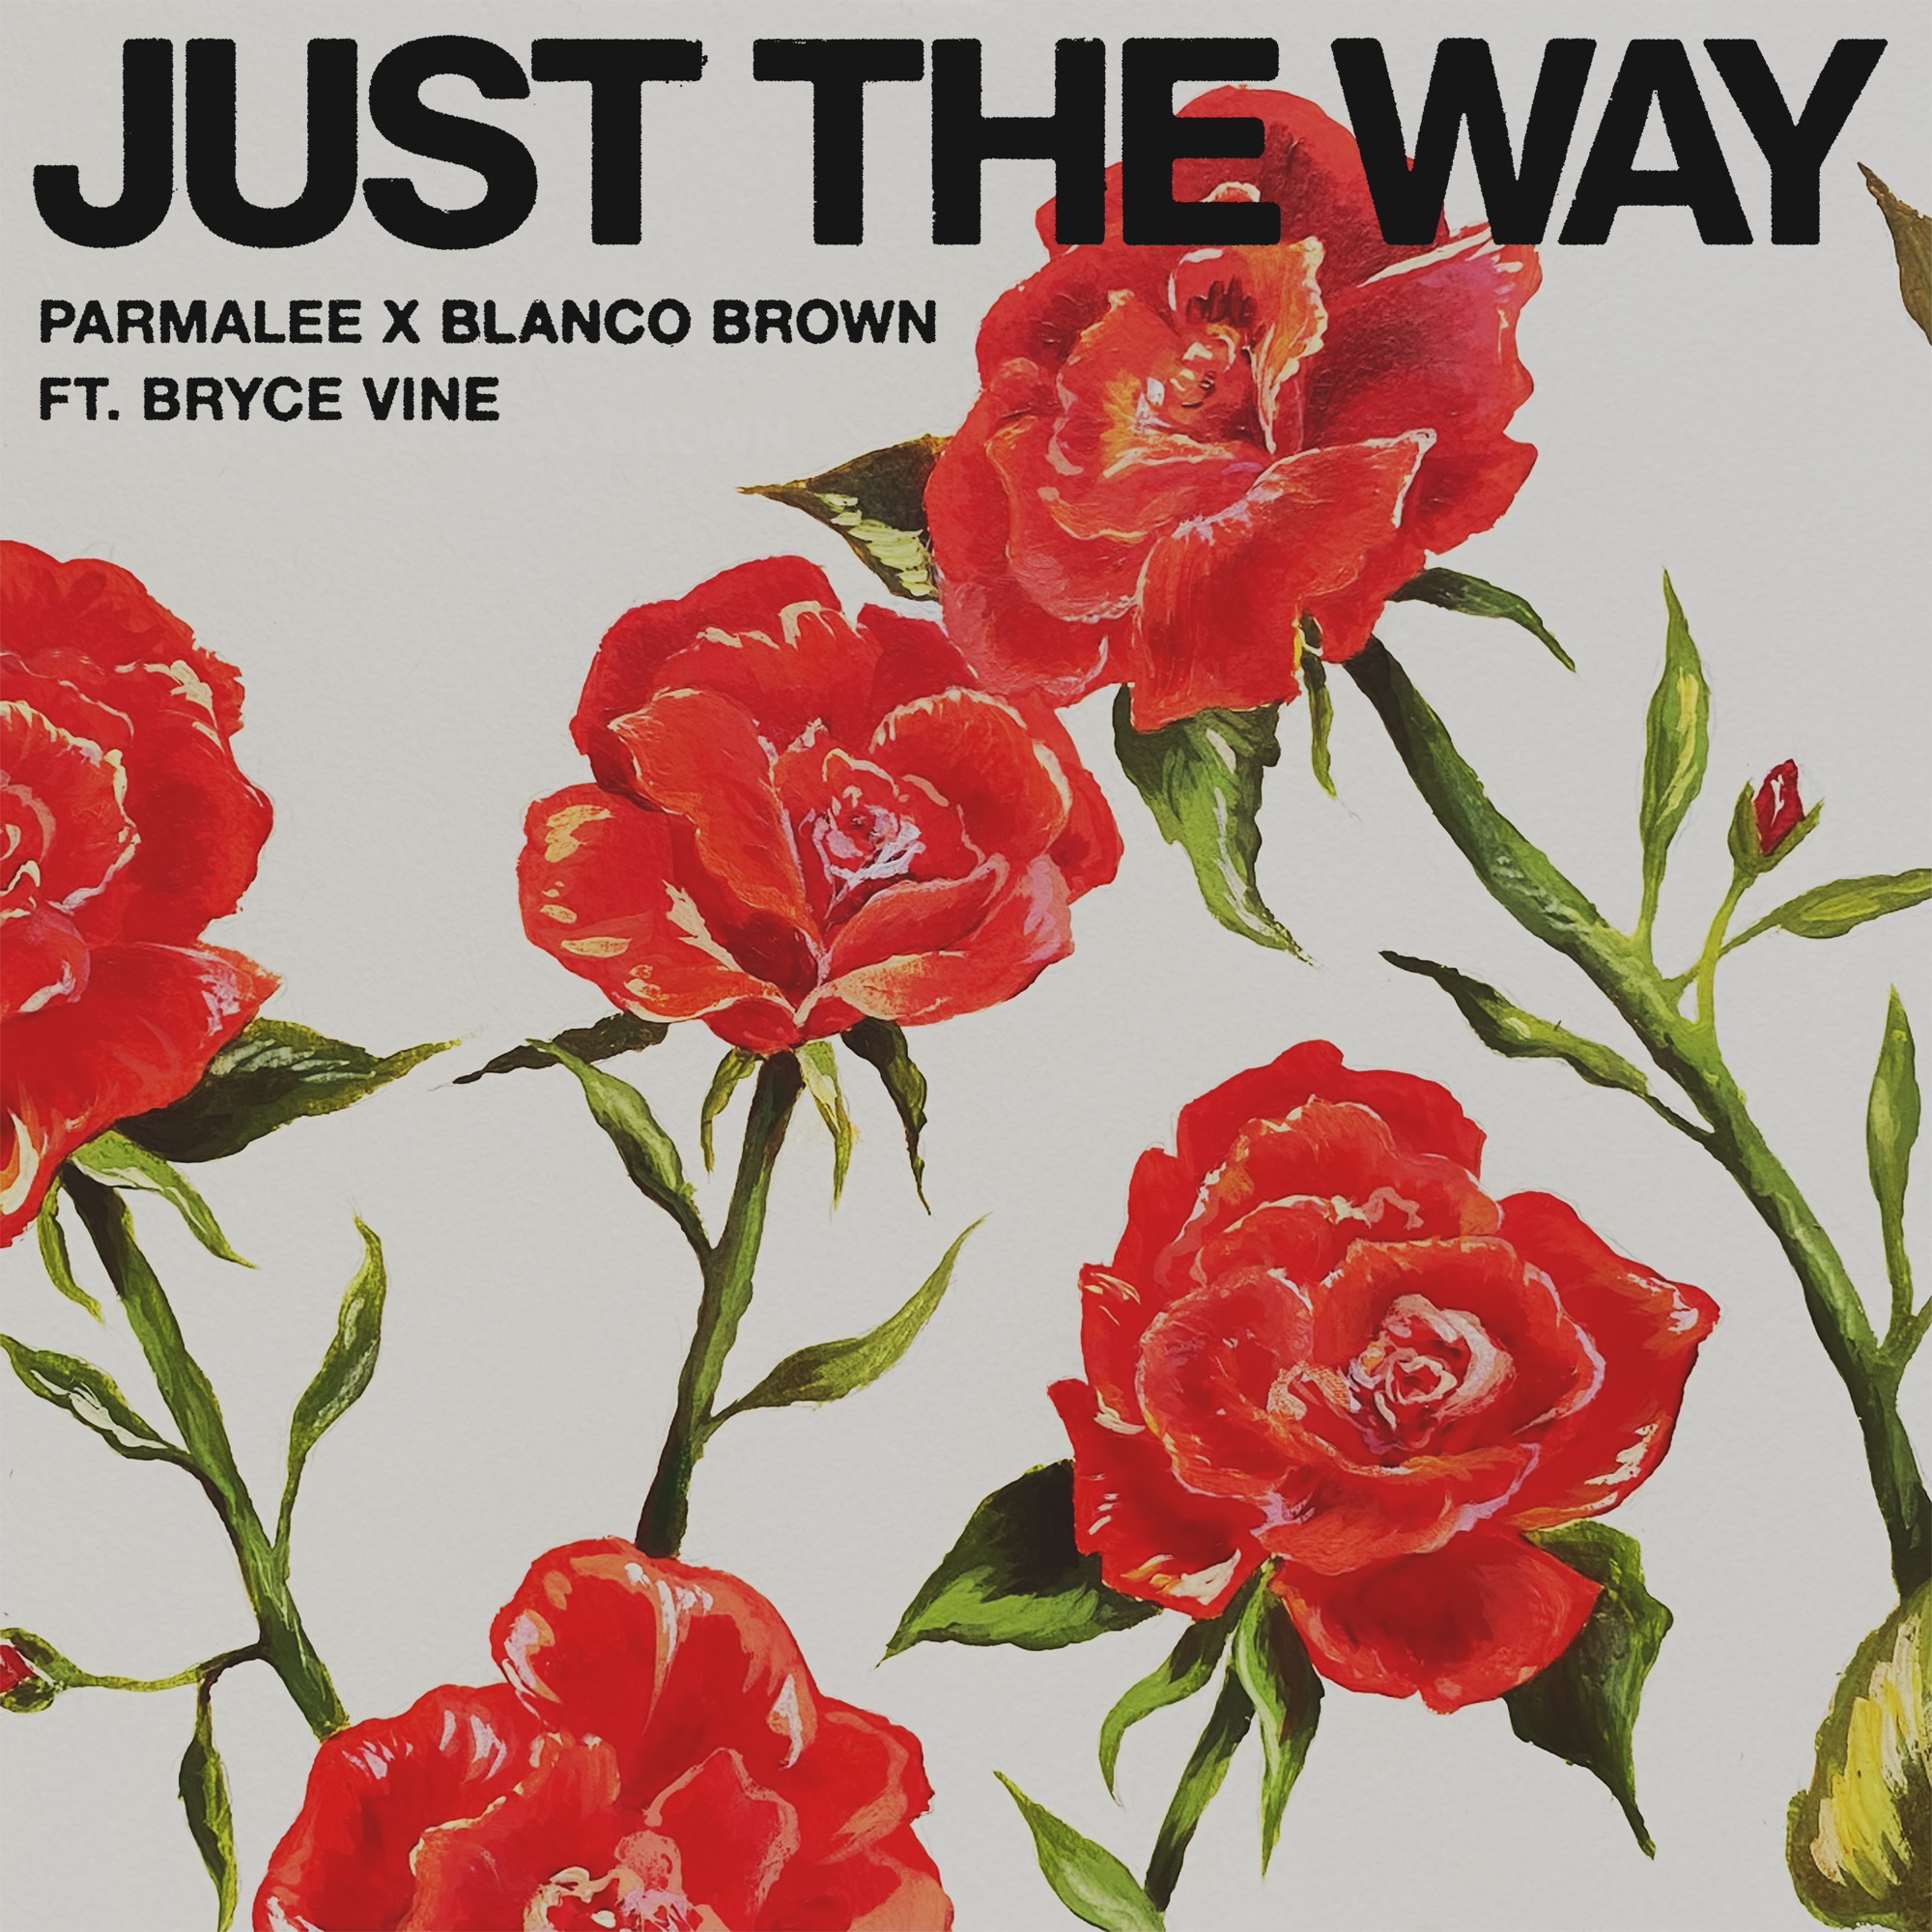 Parmalee & Blanco Brown - Just the Way (feat. Bryce Vine) - Single